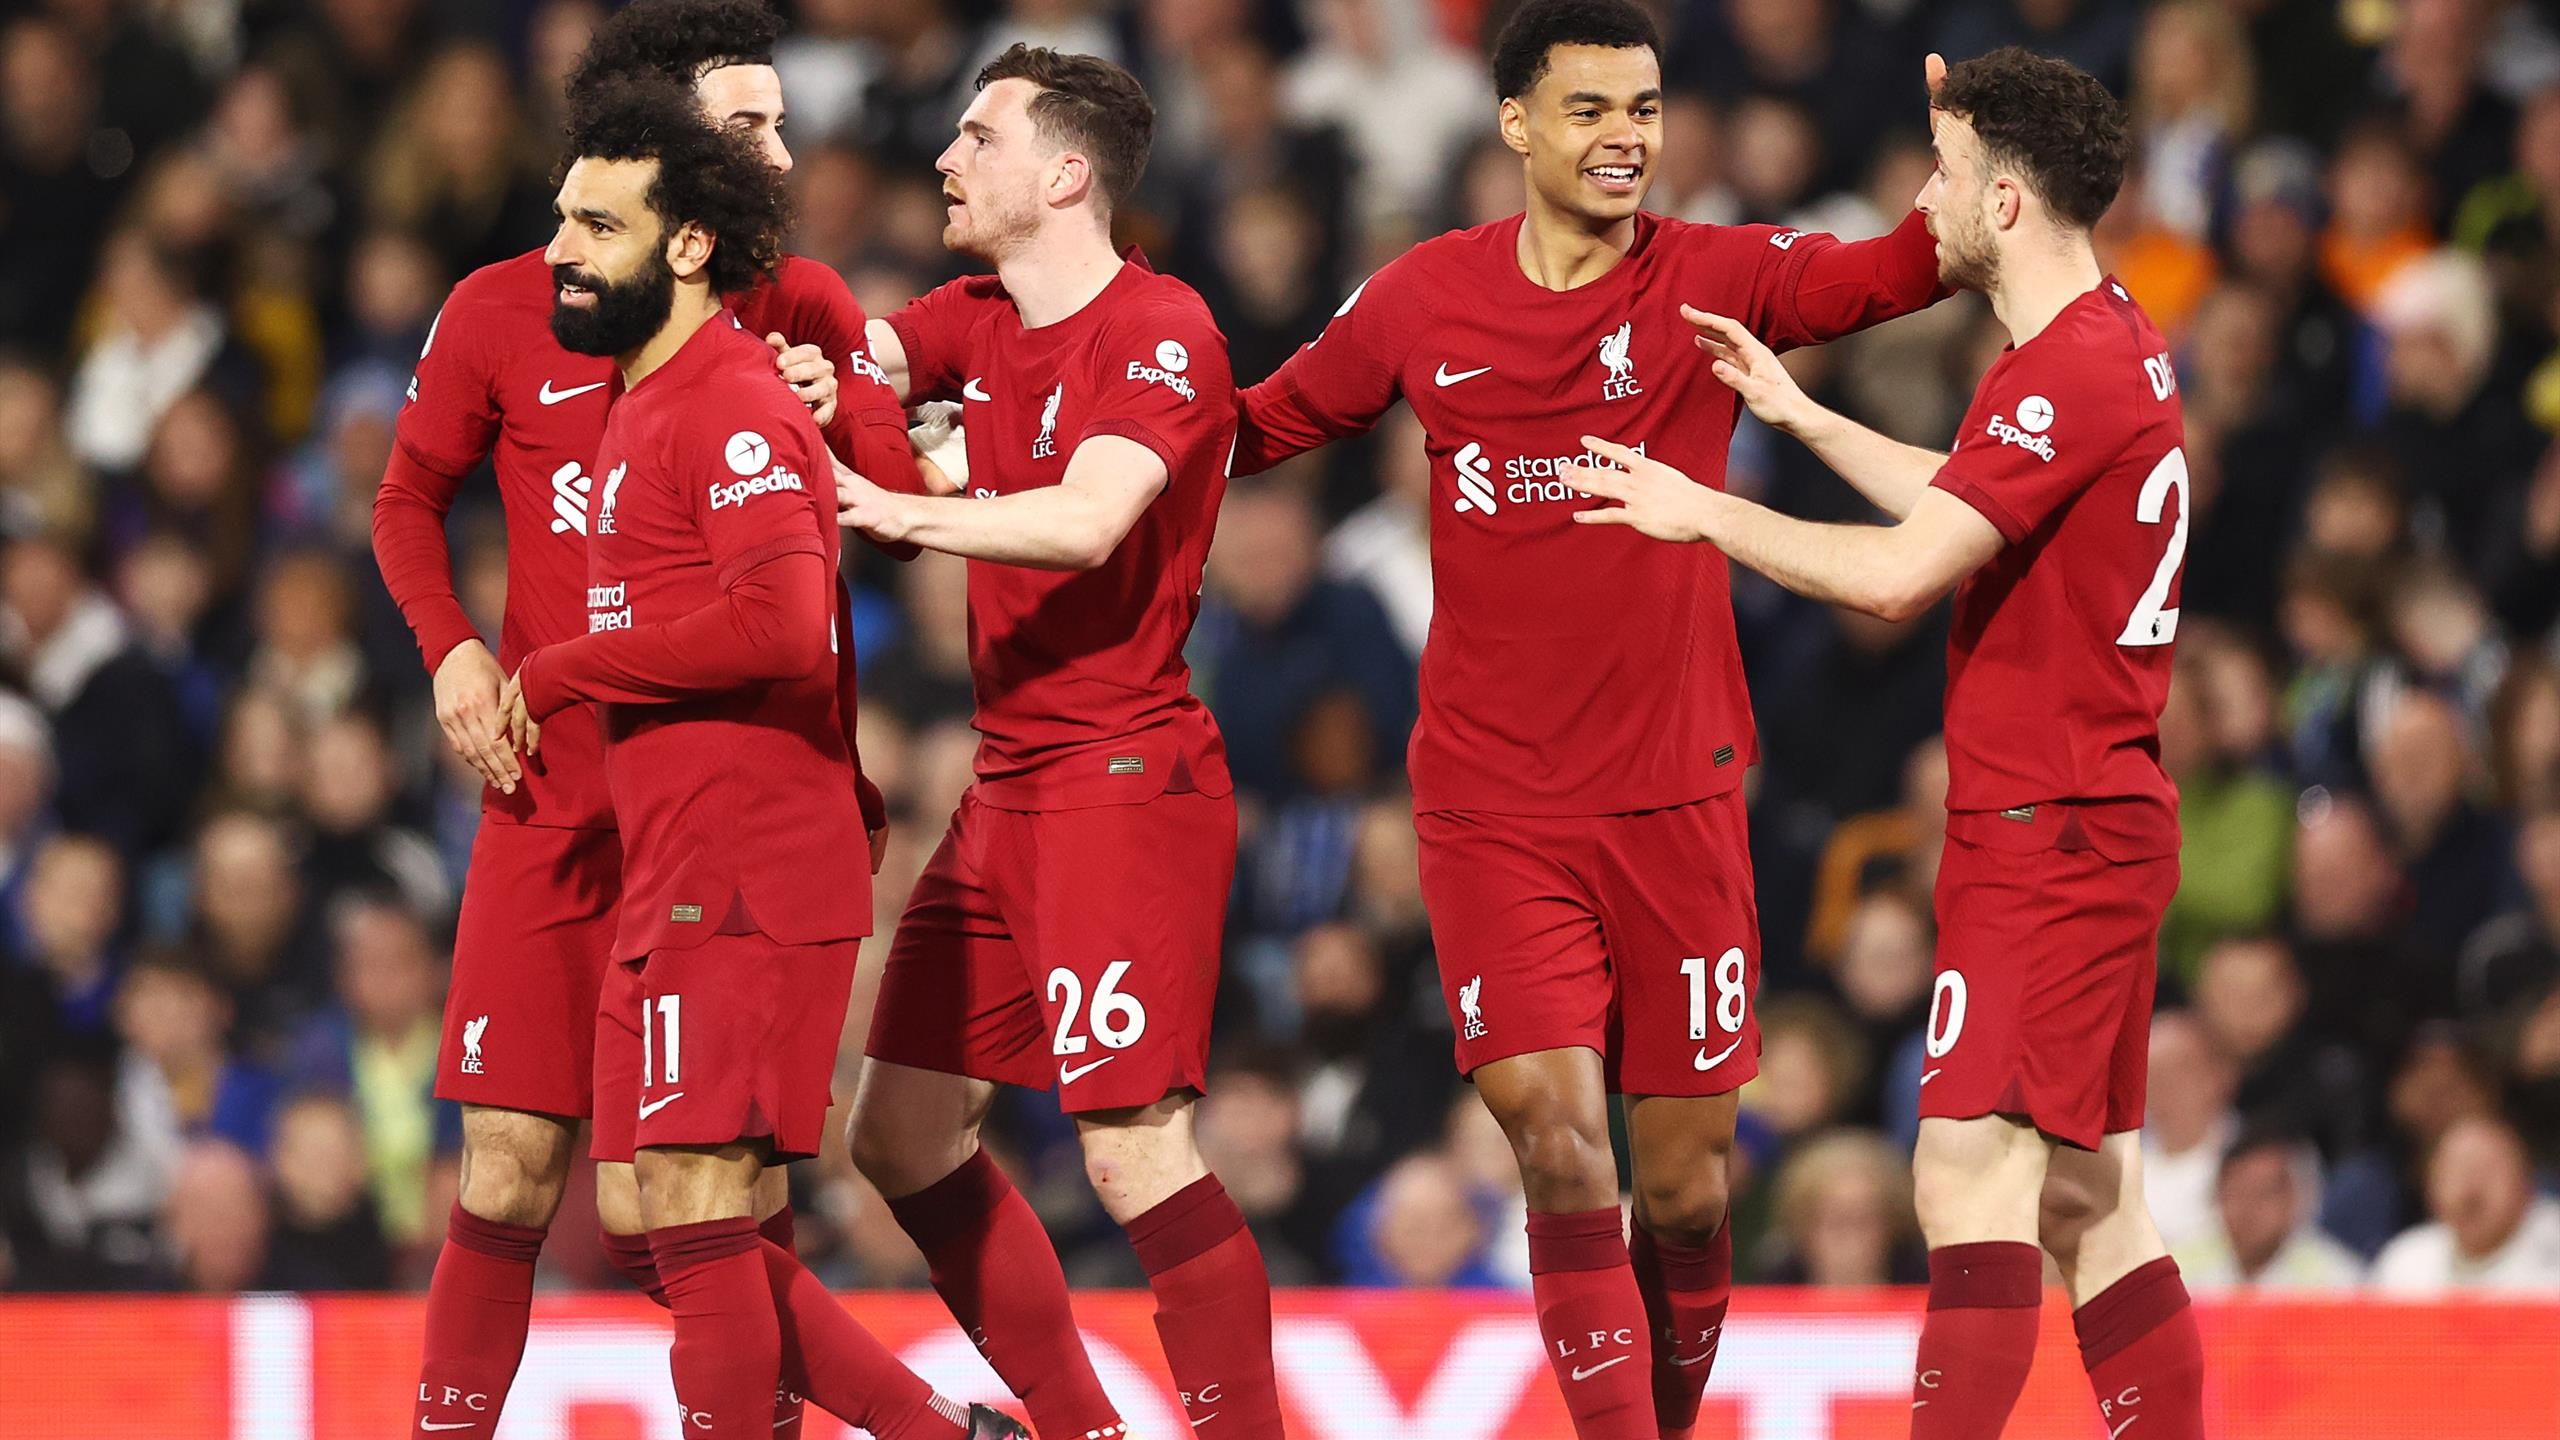 Leeds United 1-6 Liverpool Mohamed Salah and Diogo Jota both score braces as Reds boost European hopes